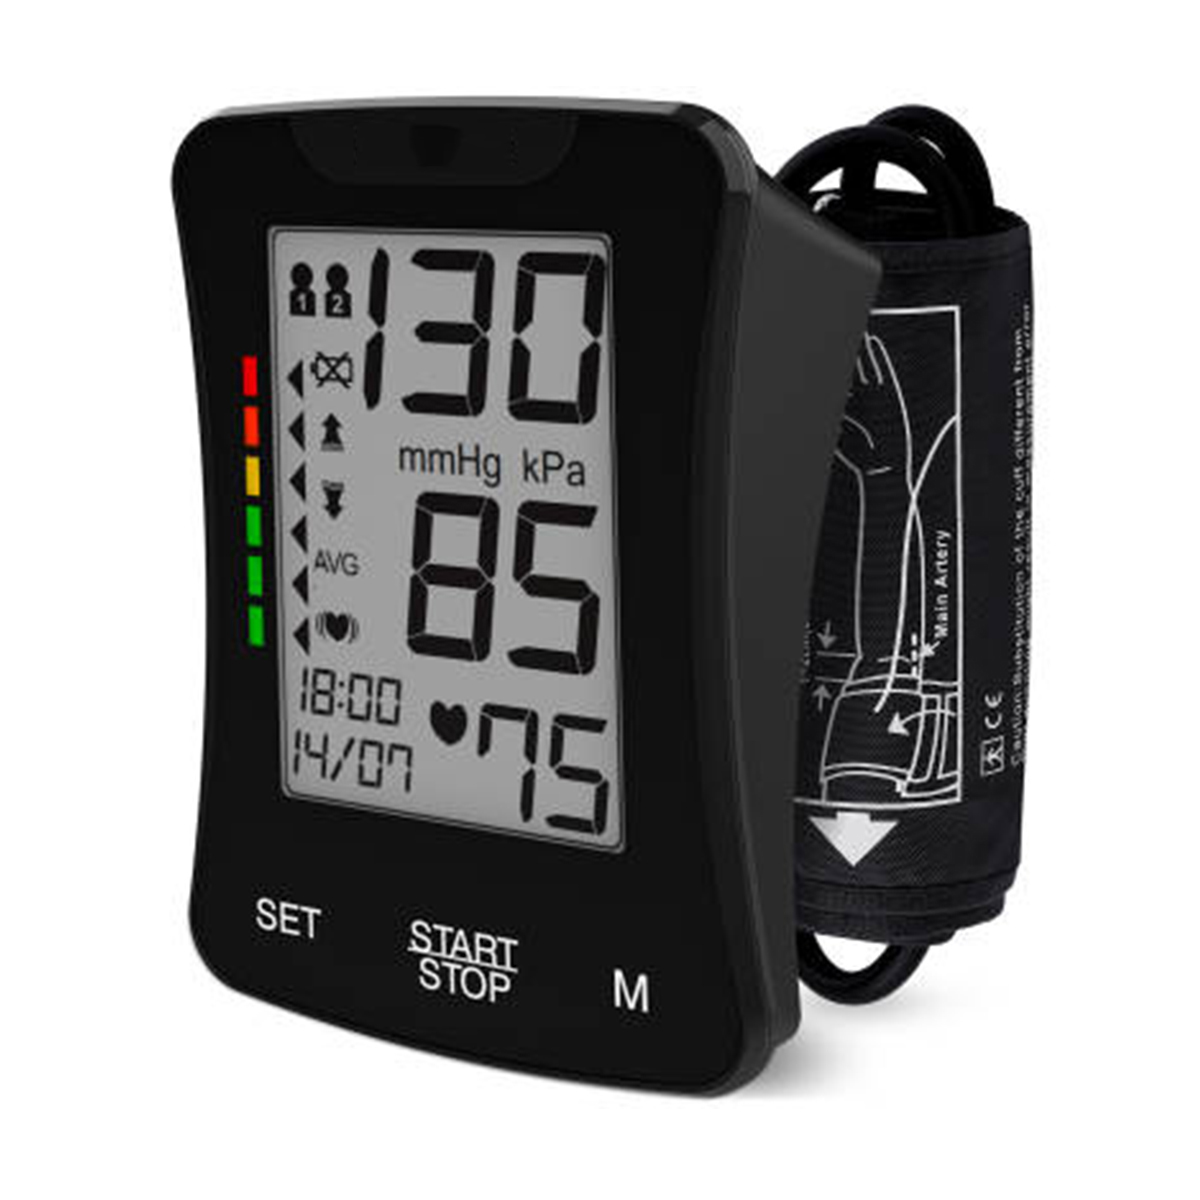 Arm-type Fully Automatic Digital Blood Pressure Monitor with Talking